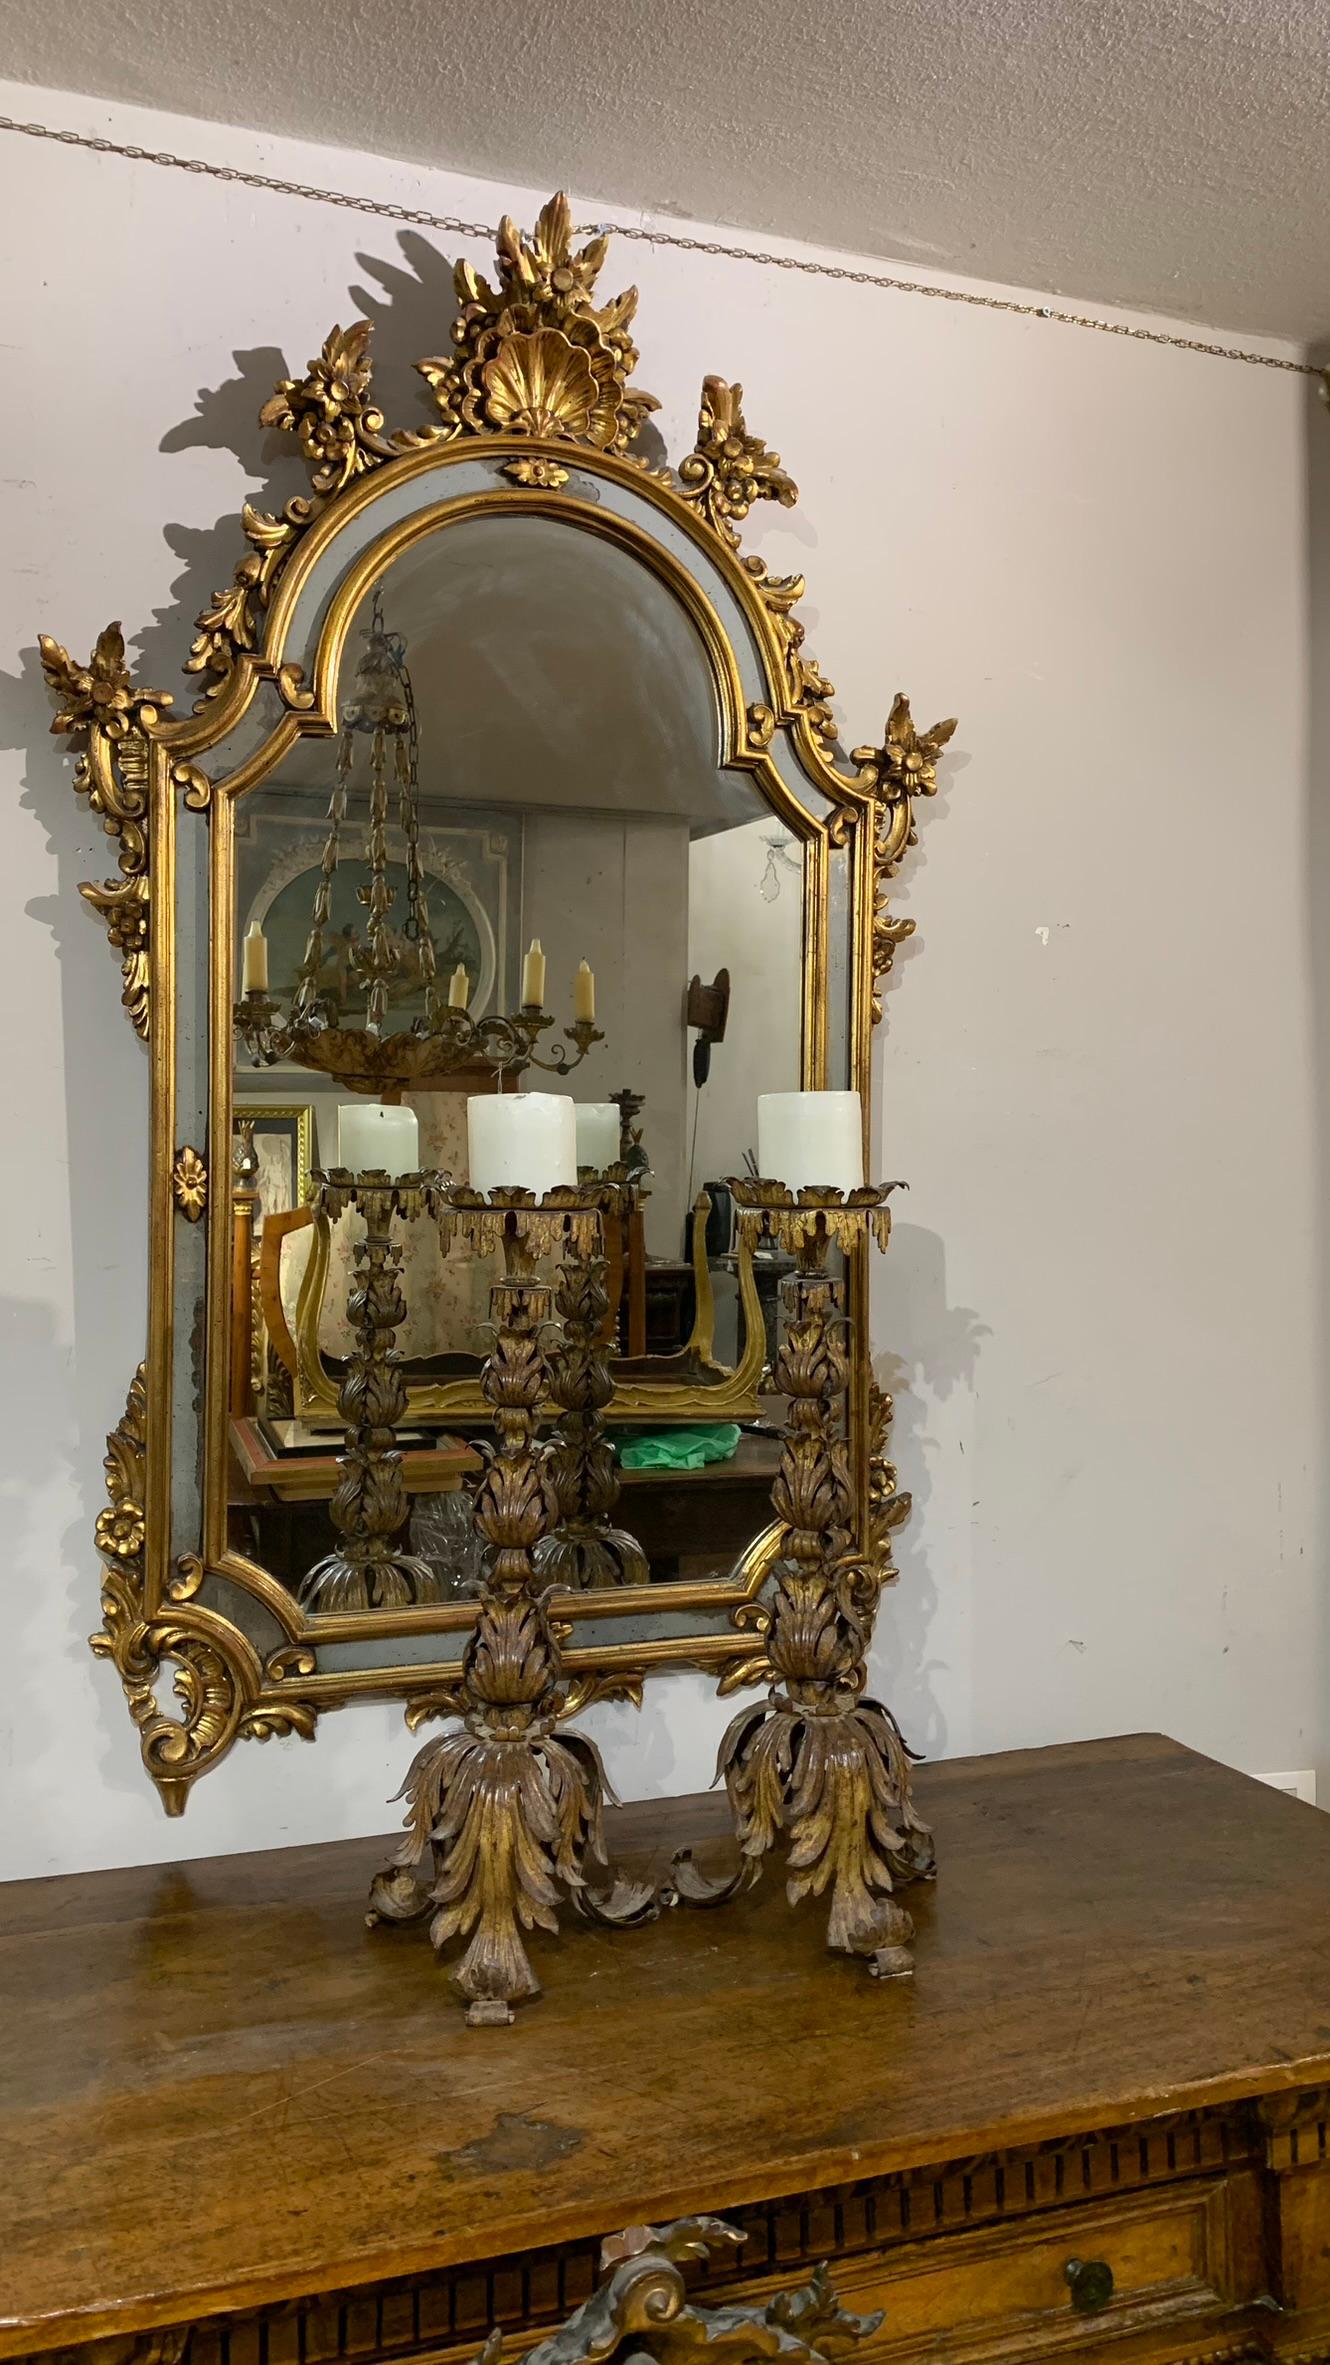 Pair of hand-forged and wrought iron candlesticks, with floral motifs and central iron core. The iron is gilded with gold leaf. Manufacture from the Marche or Veneto in the first half of the 18th century.

Measurements: HxWxD 56 x 7 x 21 cm